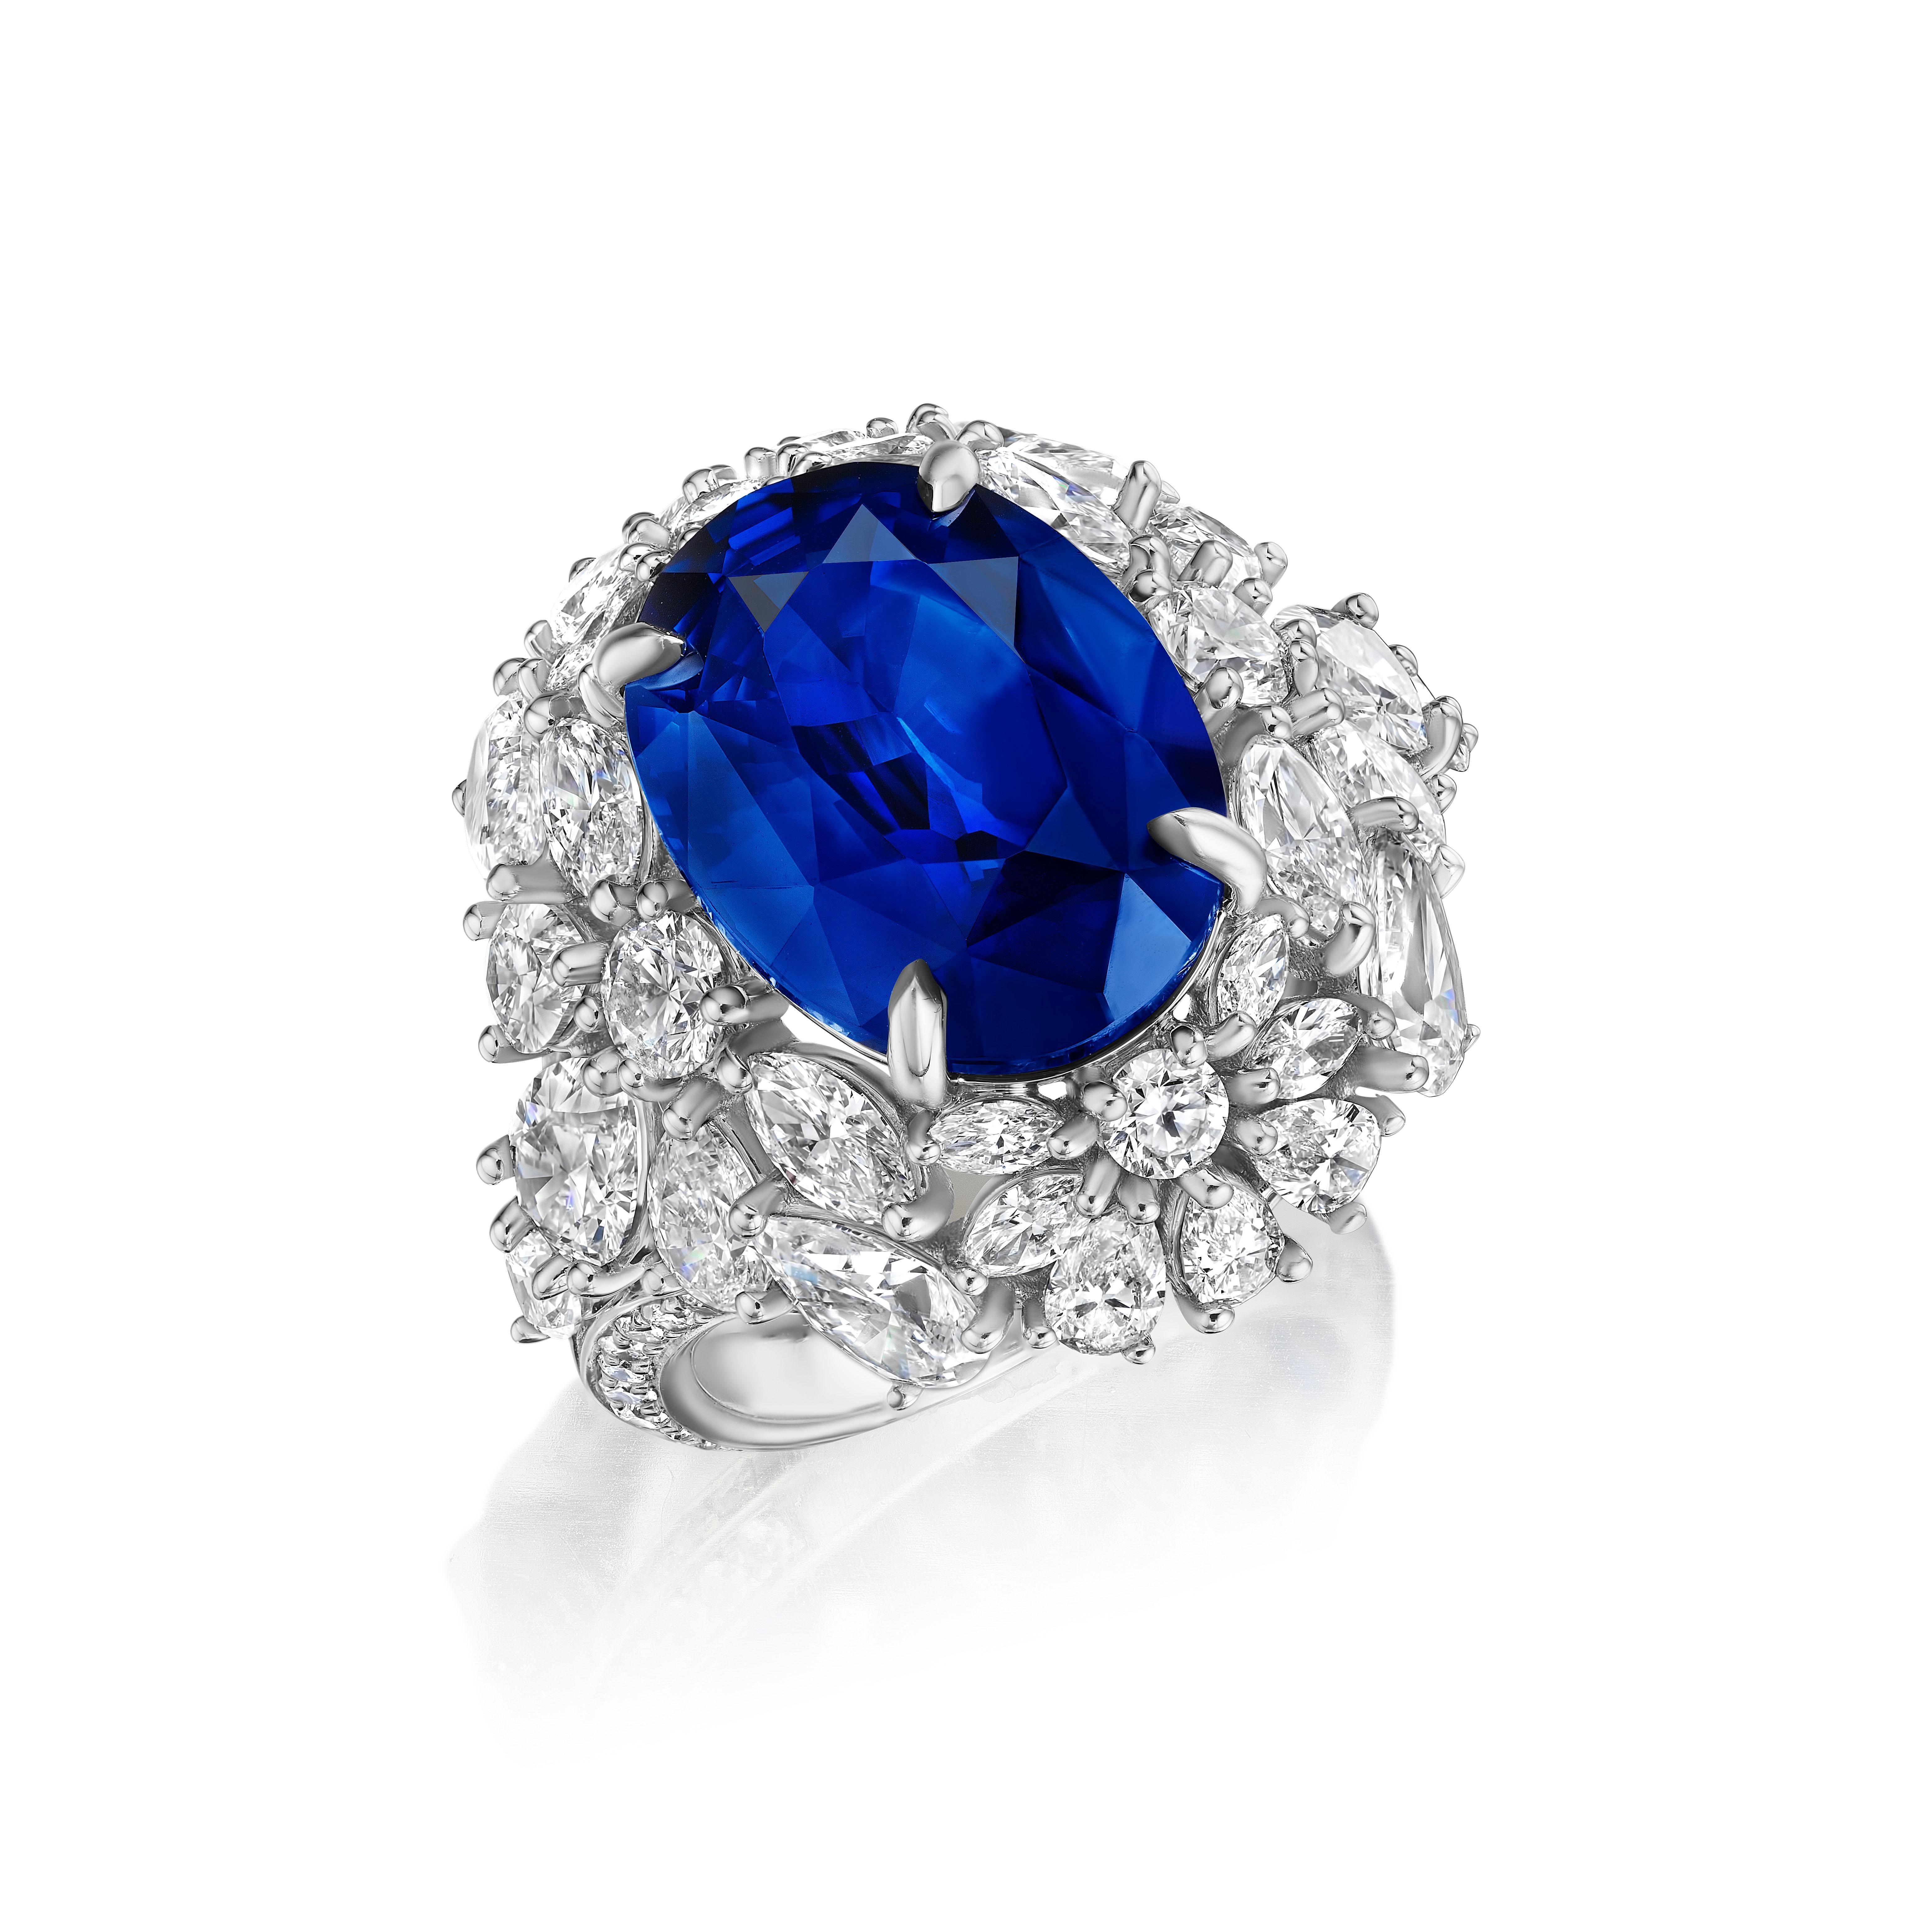 •	12.46 Carats
•	Platinum
•	Size: 6.5

•	Number of Oval Sapphires: 1
•	Carat Weight: 7.89ctw
•	Origin: Sri Lanka
•	Color: Vivid Blue – Royal Blue
•	Stone Measurements: 13.85 x 10.47mm

•	Number of Pear Shape Diamonds: 18
•	Carat Weight: